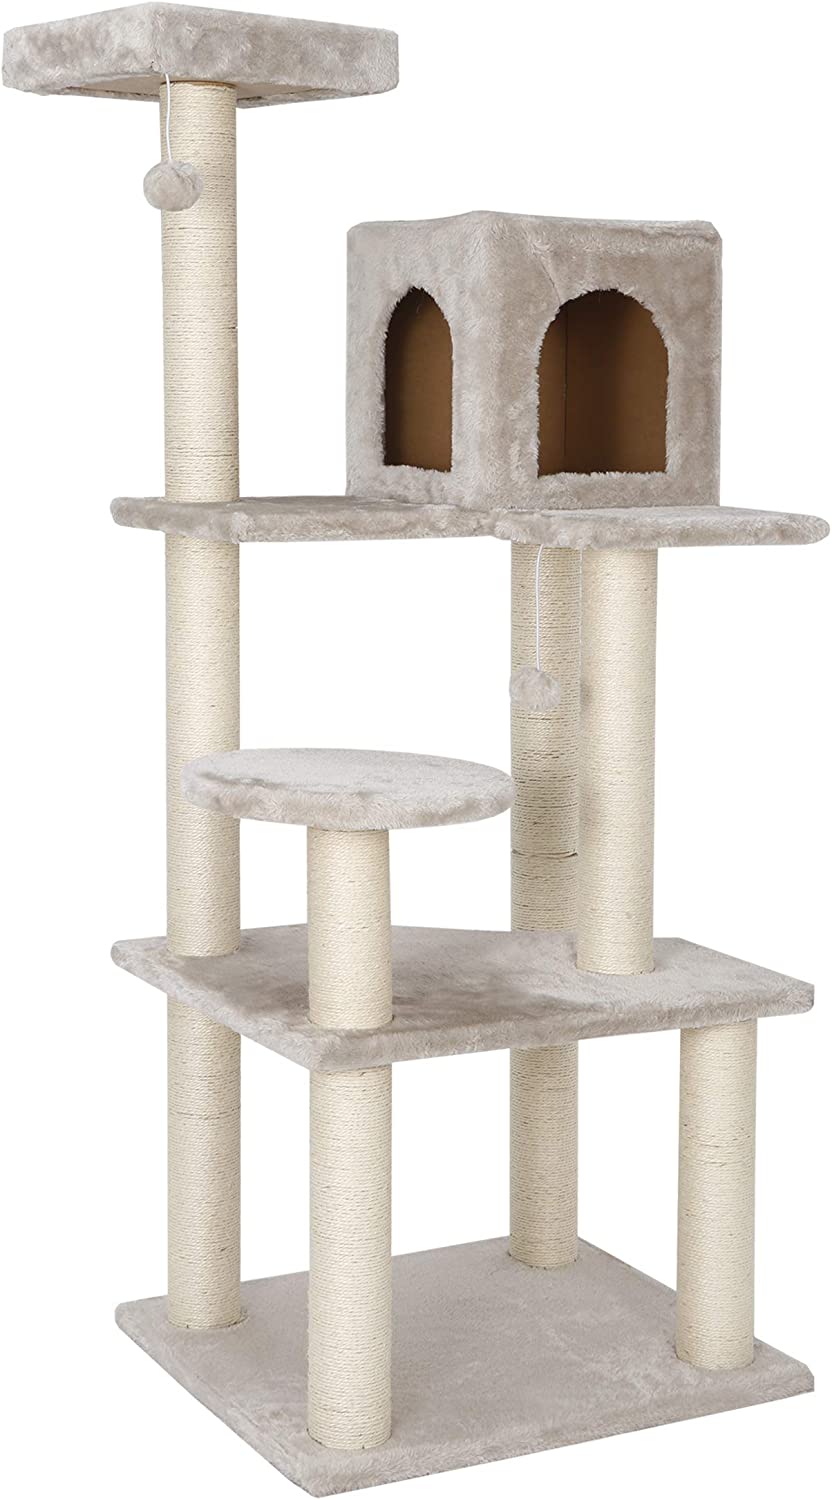 56in Cat Trees with Sisal Scratching Posts Perches and Condo, Cat Tower Furniture Kitty Activity Center Kitten Play House